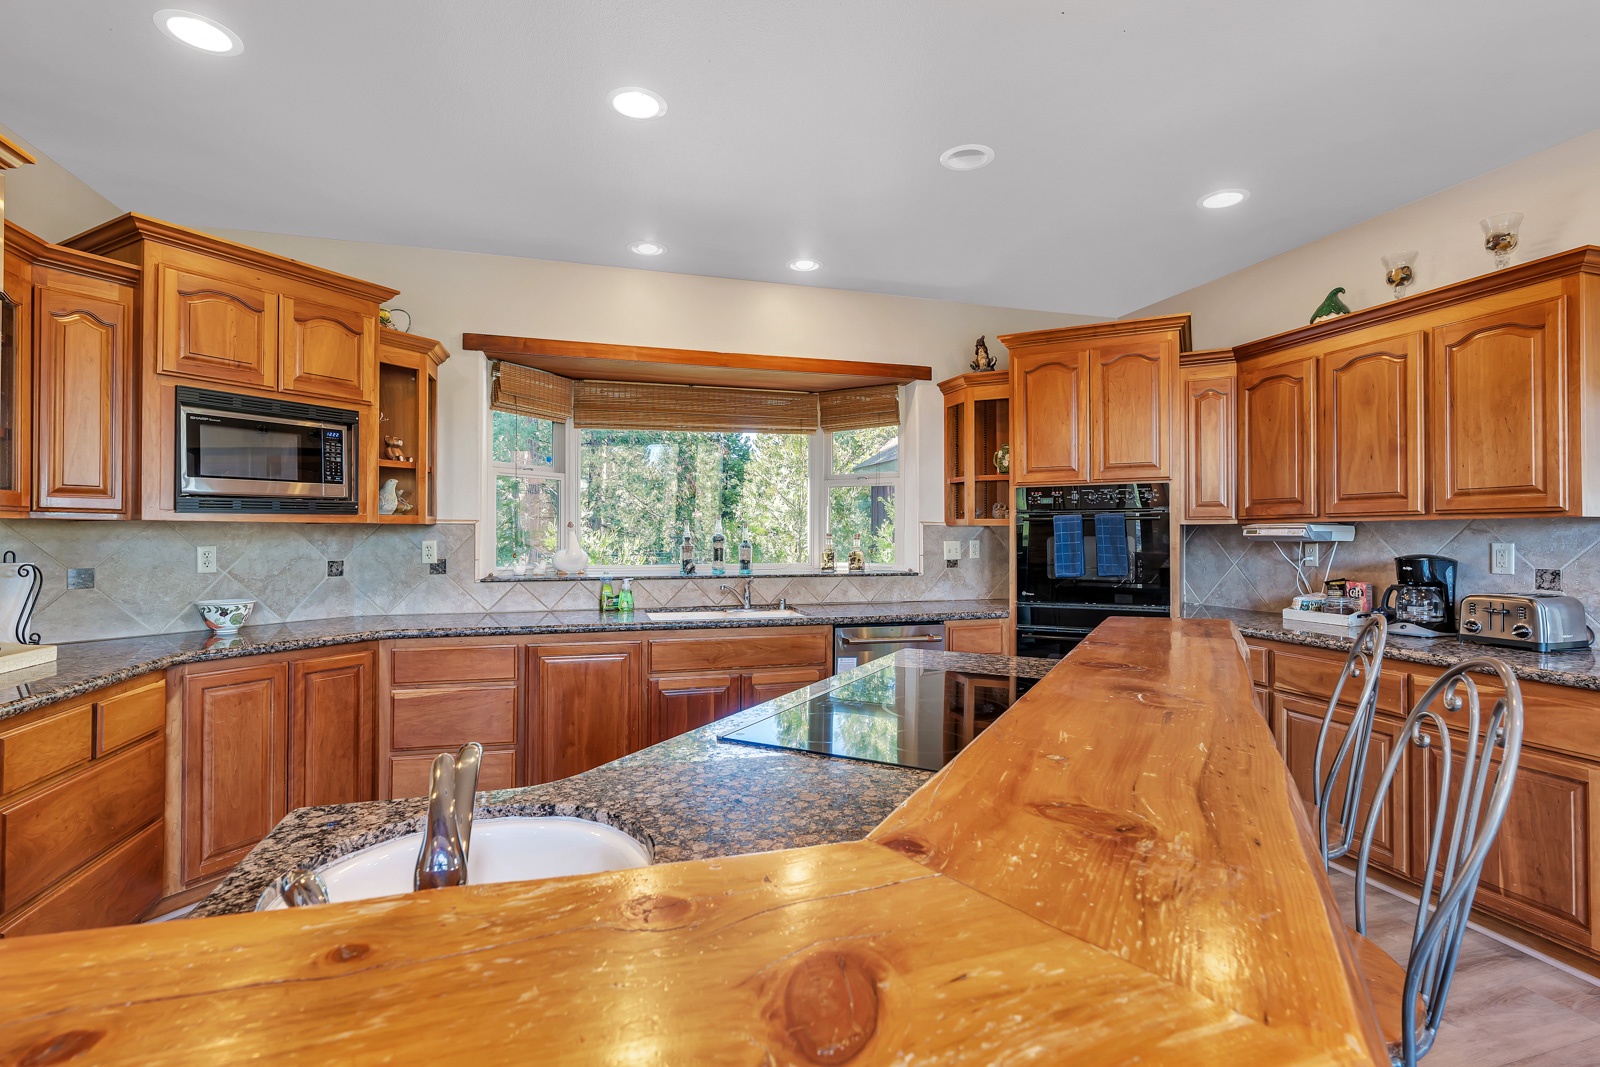 The beautiful kitchen offers ample space & all the comforts of home